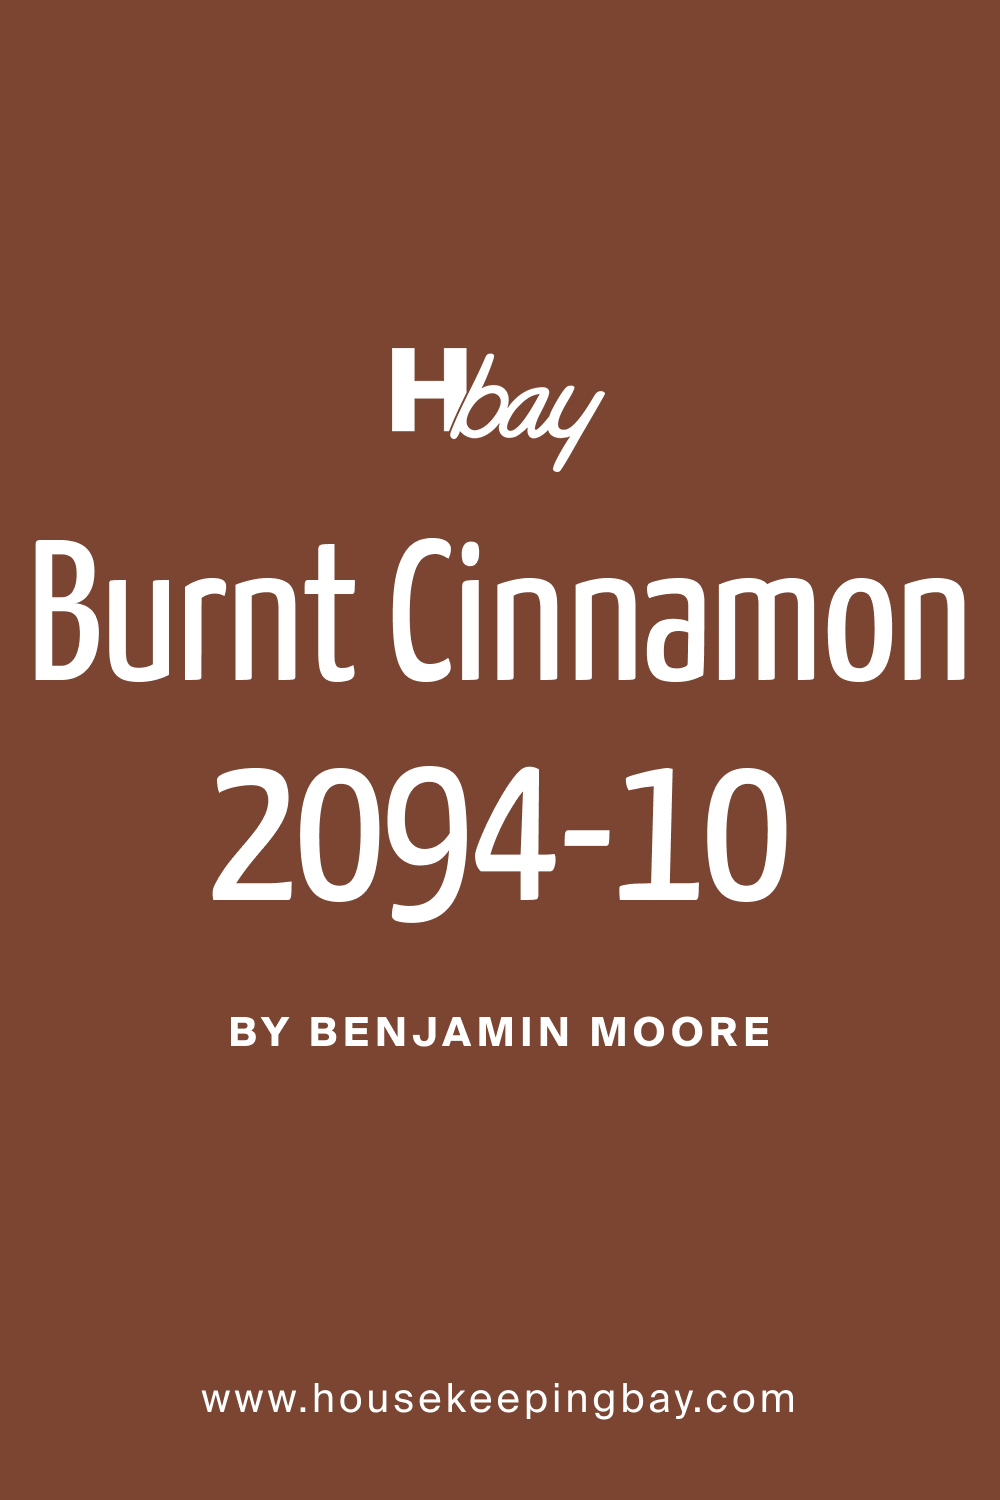 What Color Is Burnt Cinnamon 2094-10?